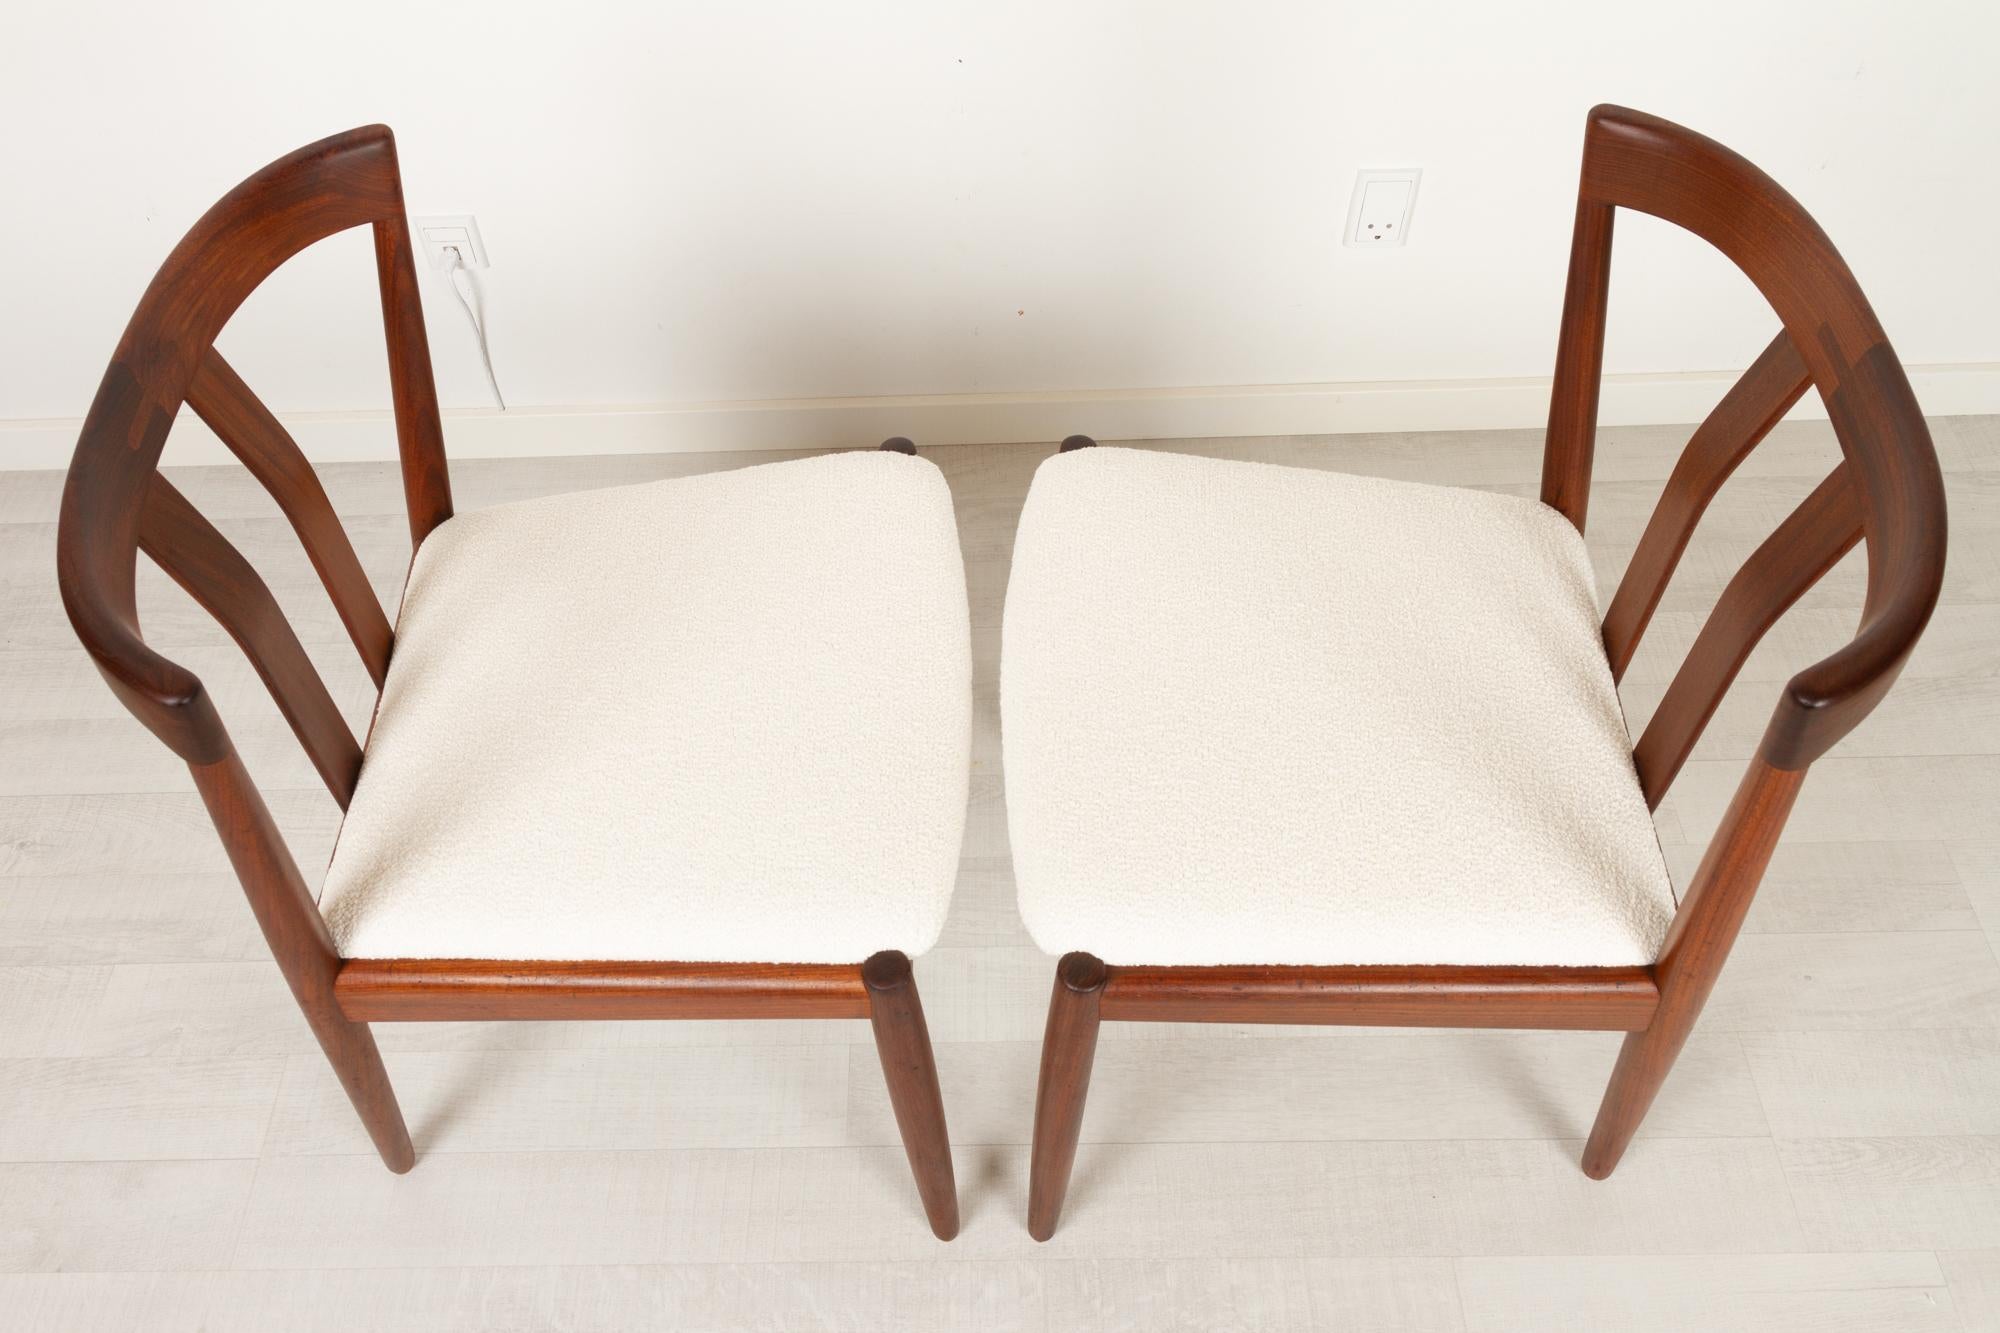 Vintage Danish Teak Dining Chairs 1960s, Set of 2 For Sale 3